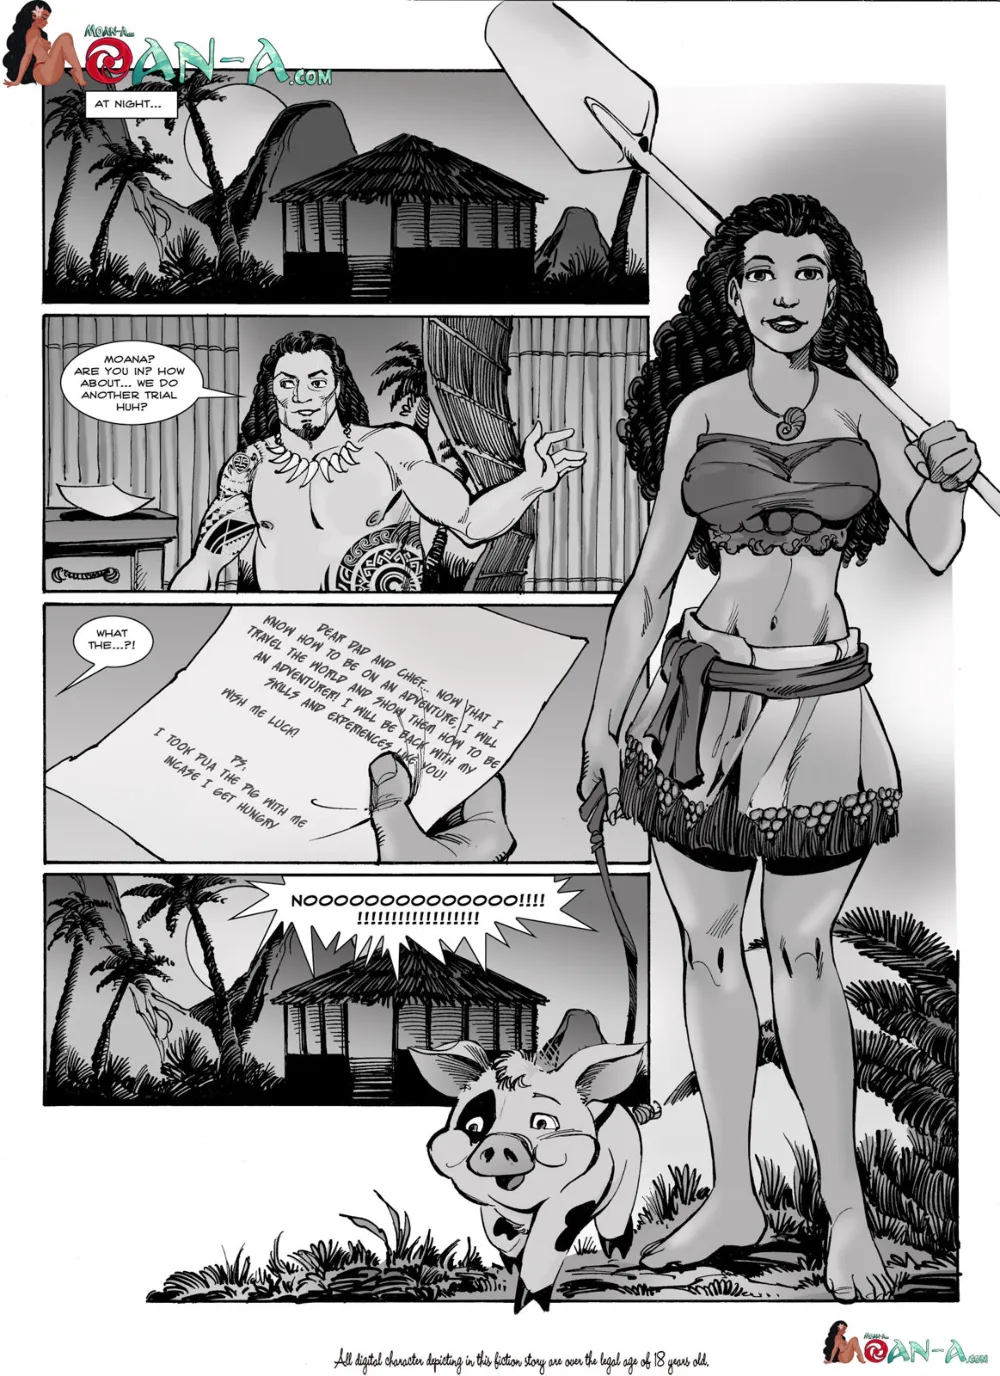 Moan-a - Call - Page 10